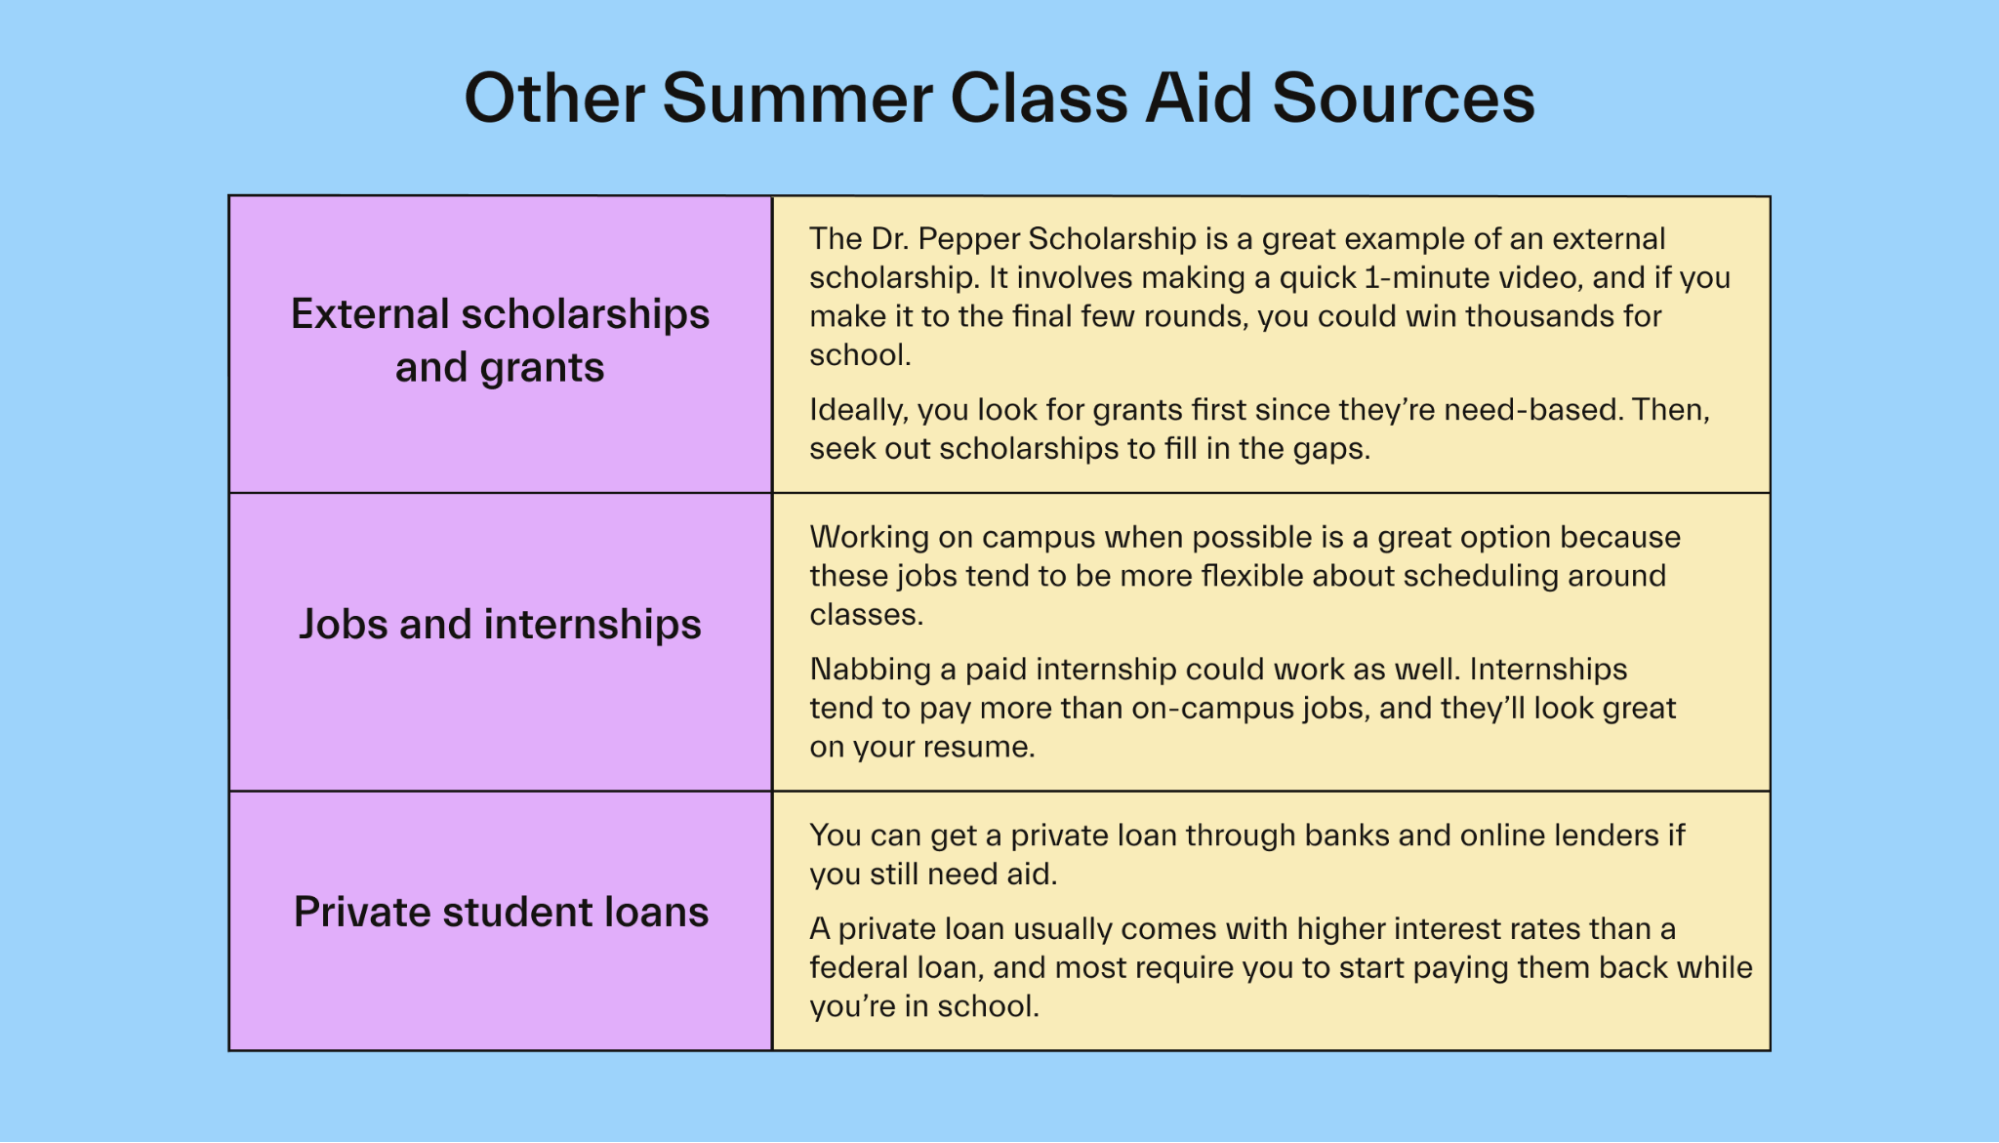 Other Summer Class Aid Sources